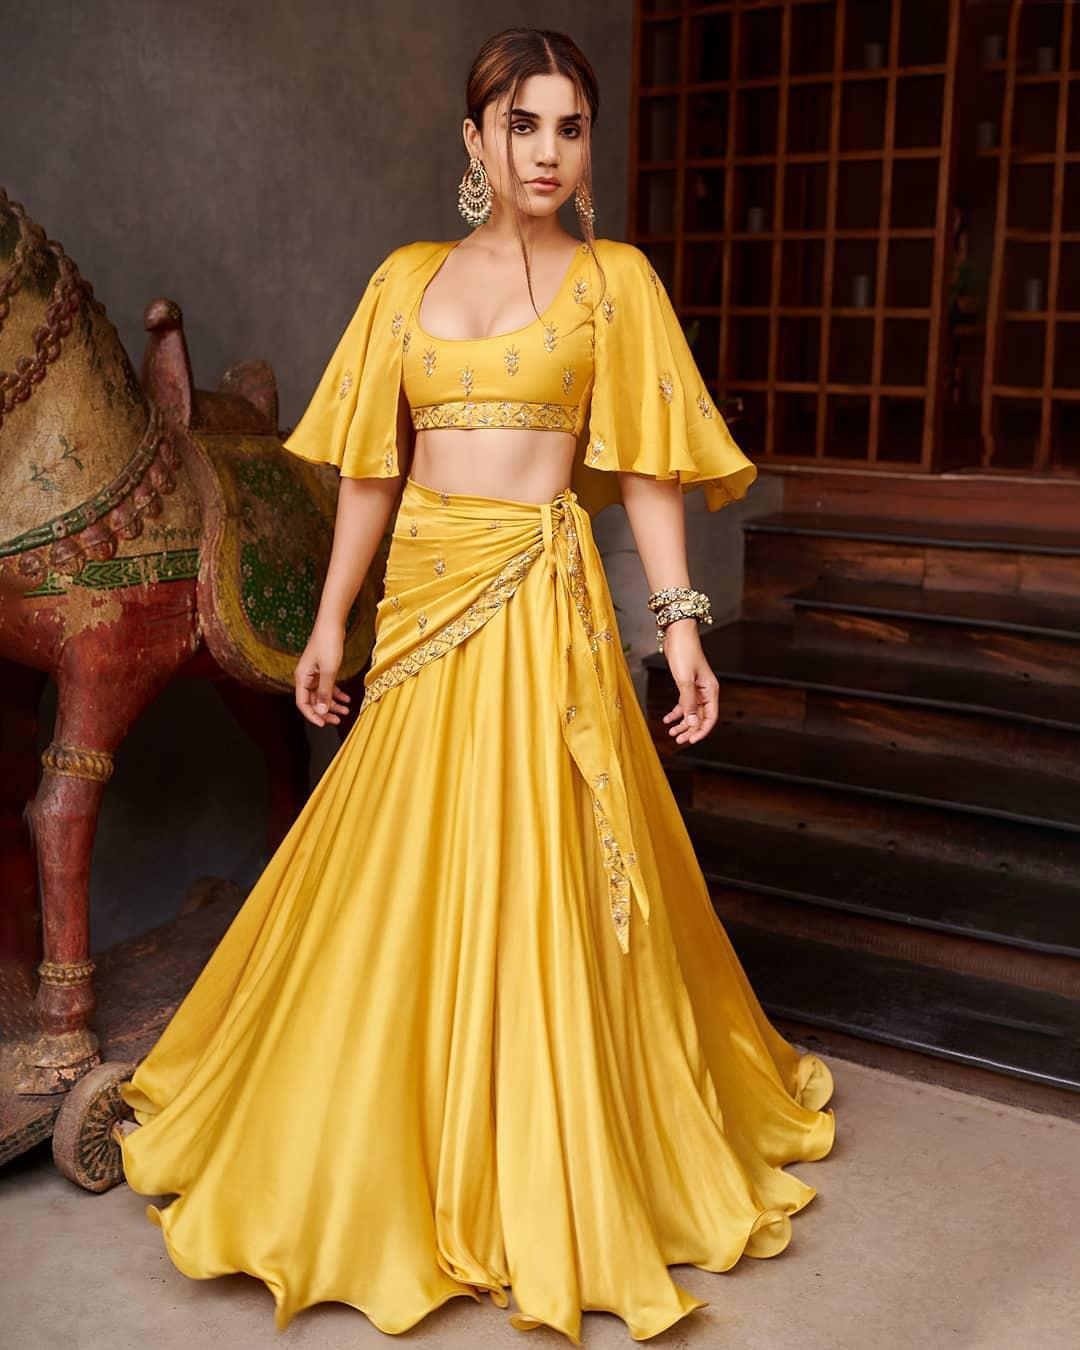 10 Haldi Ceremony Outfit Ideas which are Trendy as ever (Under 35K) | Haldi  ceremony outfit, Fashion, Haldi outfits